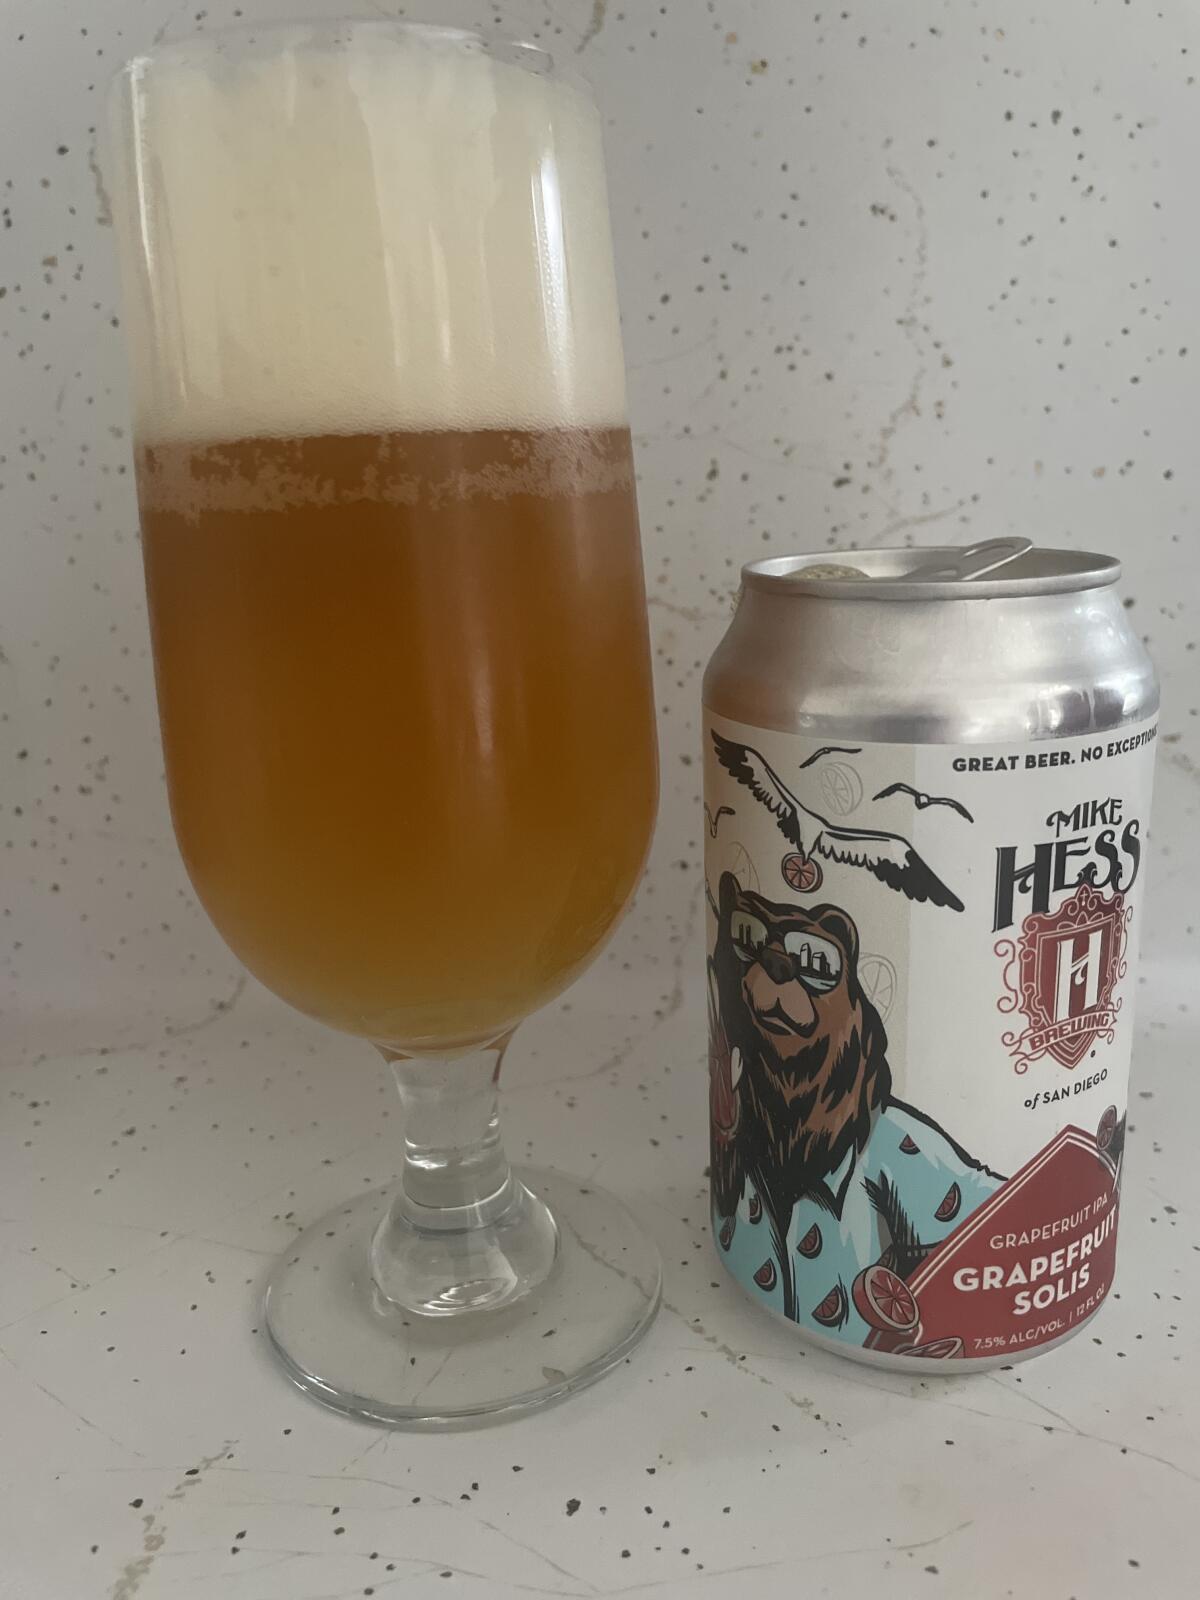 Mike Hess Brewing's Grapefruit Solis, an India pale ale.